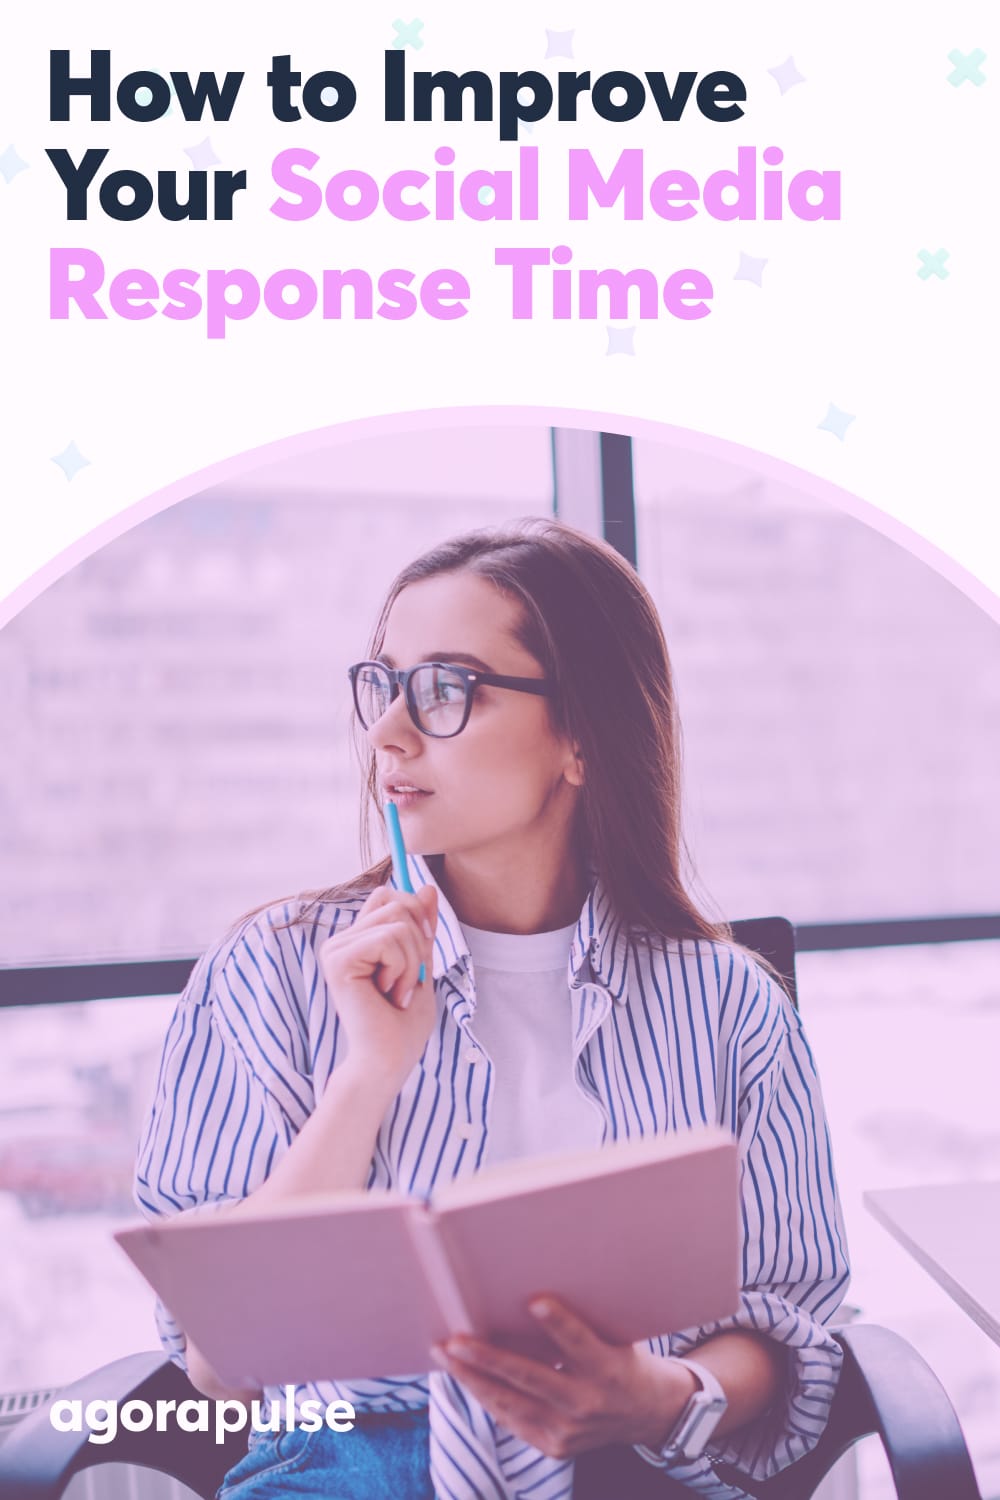 How to Improve Your Response Time for Better Customer Service